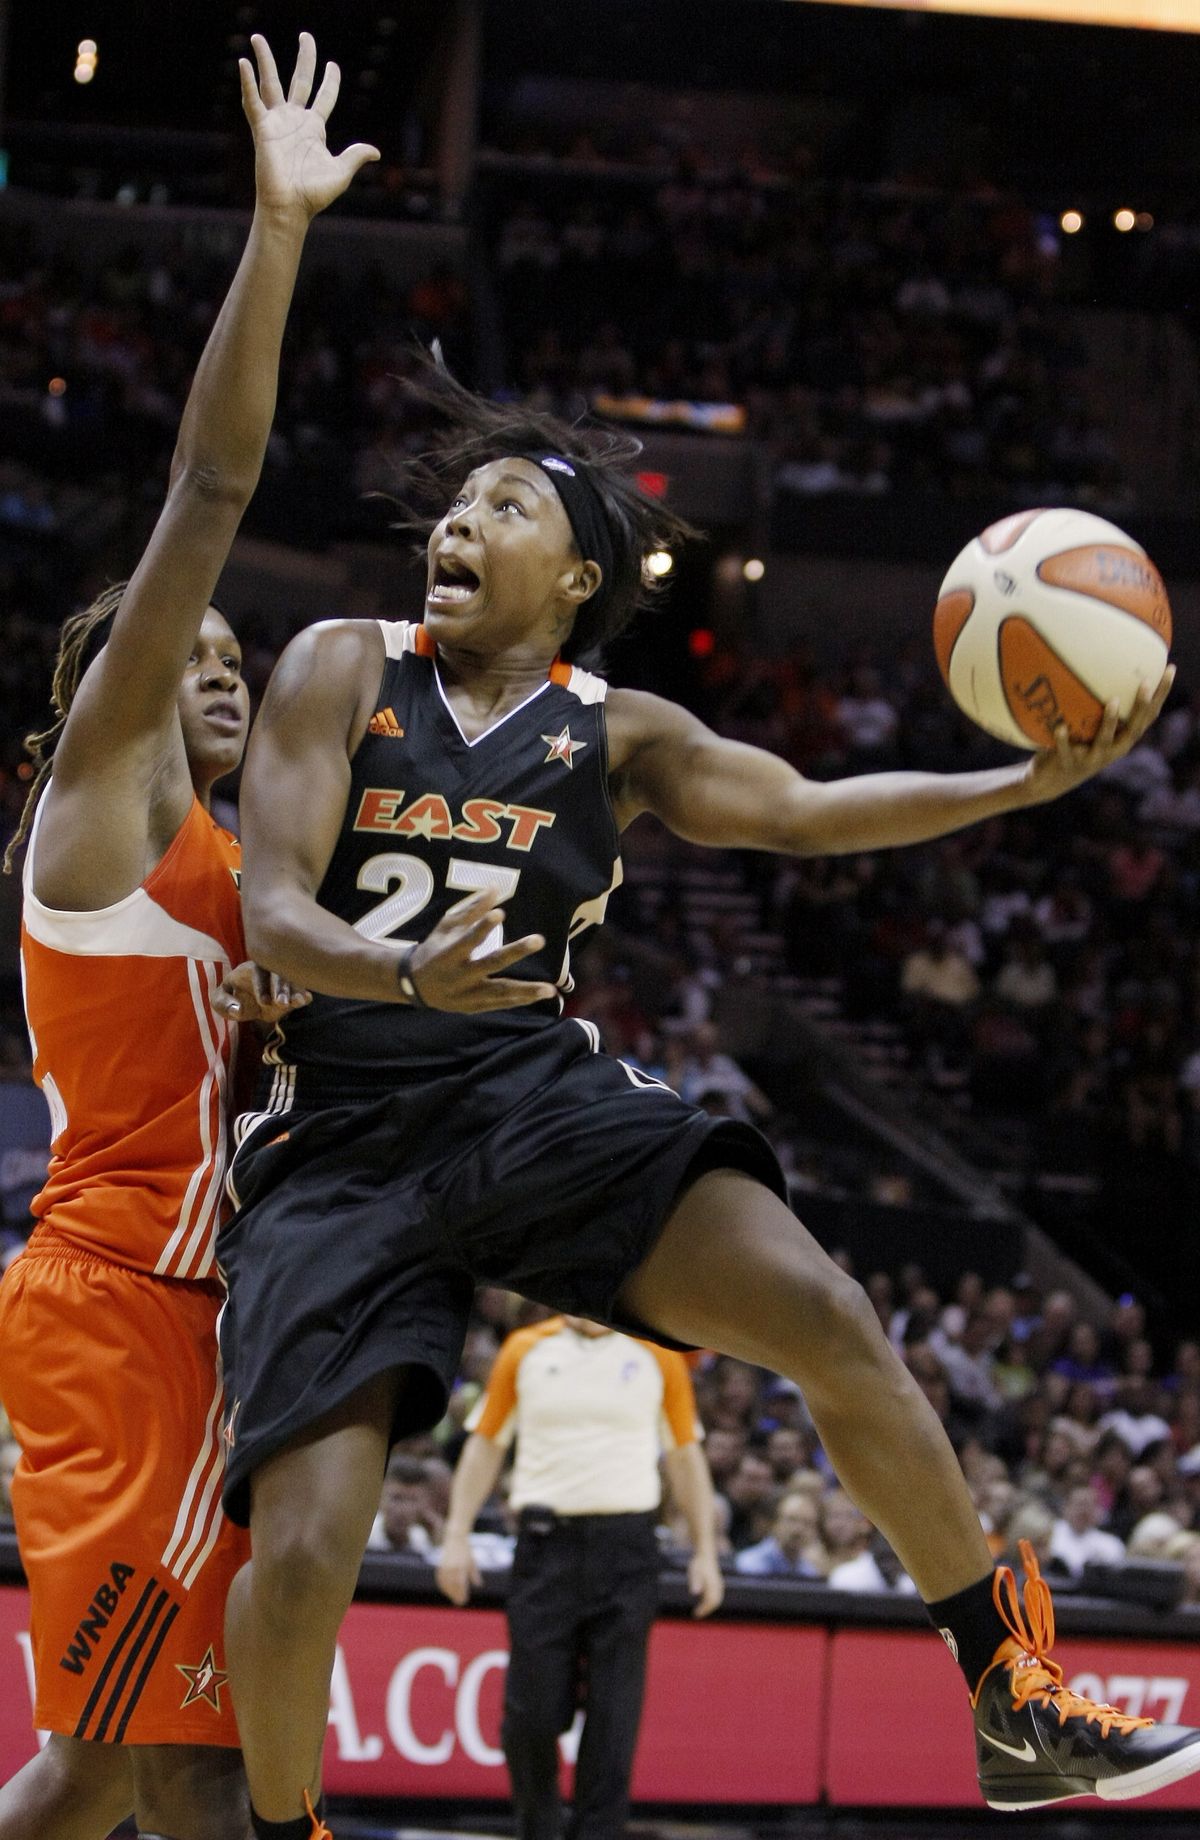 The East’s Cappie Pondexter shoots over Rebekkah Brunson during the first half of the WNBA All-Star game. (Associated Press)